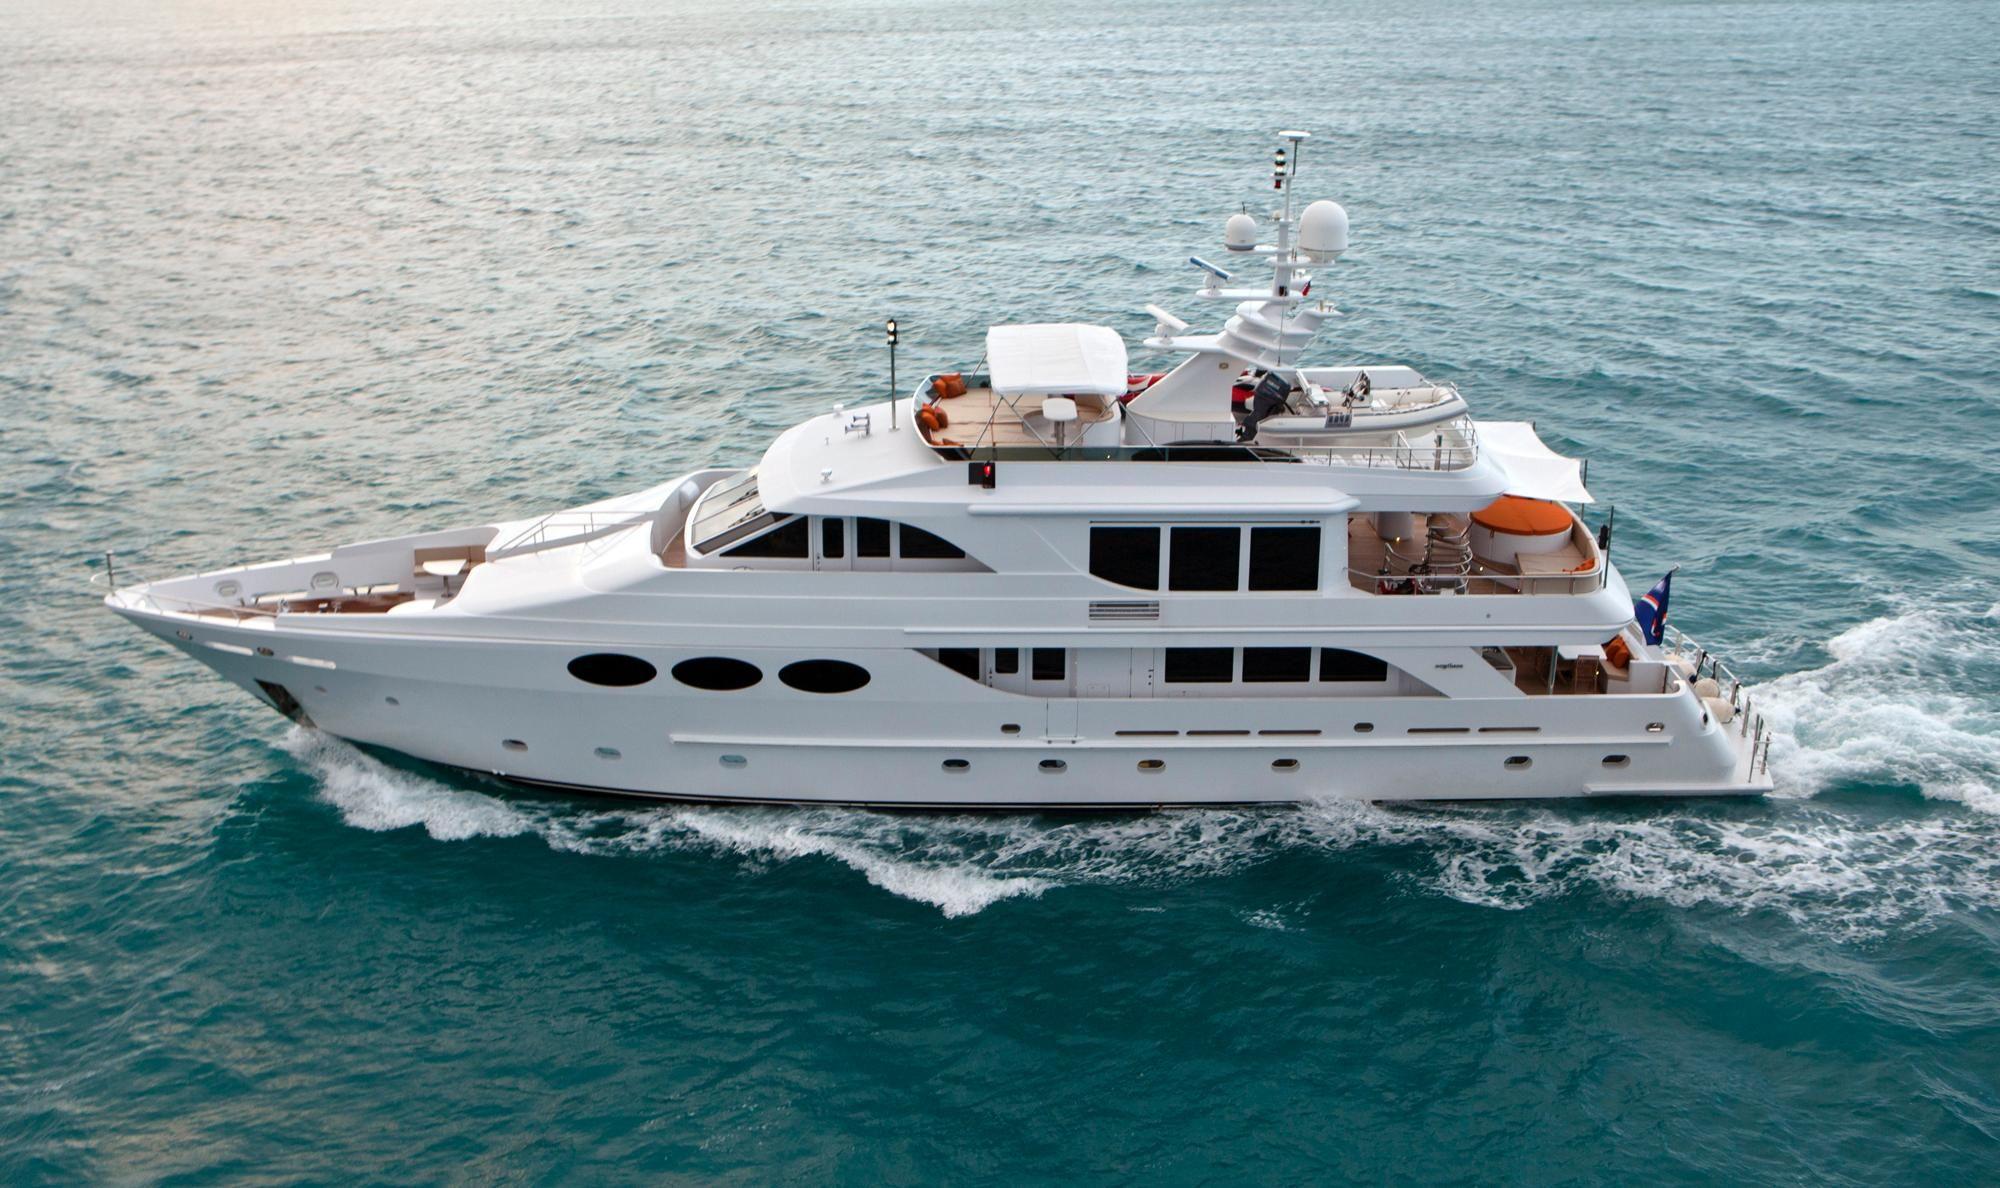 120 ft yacht cost